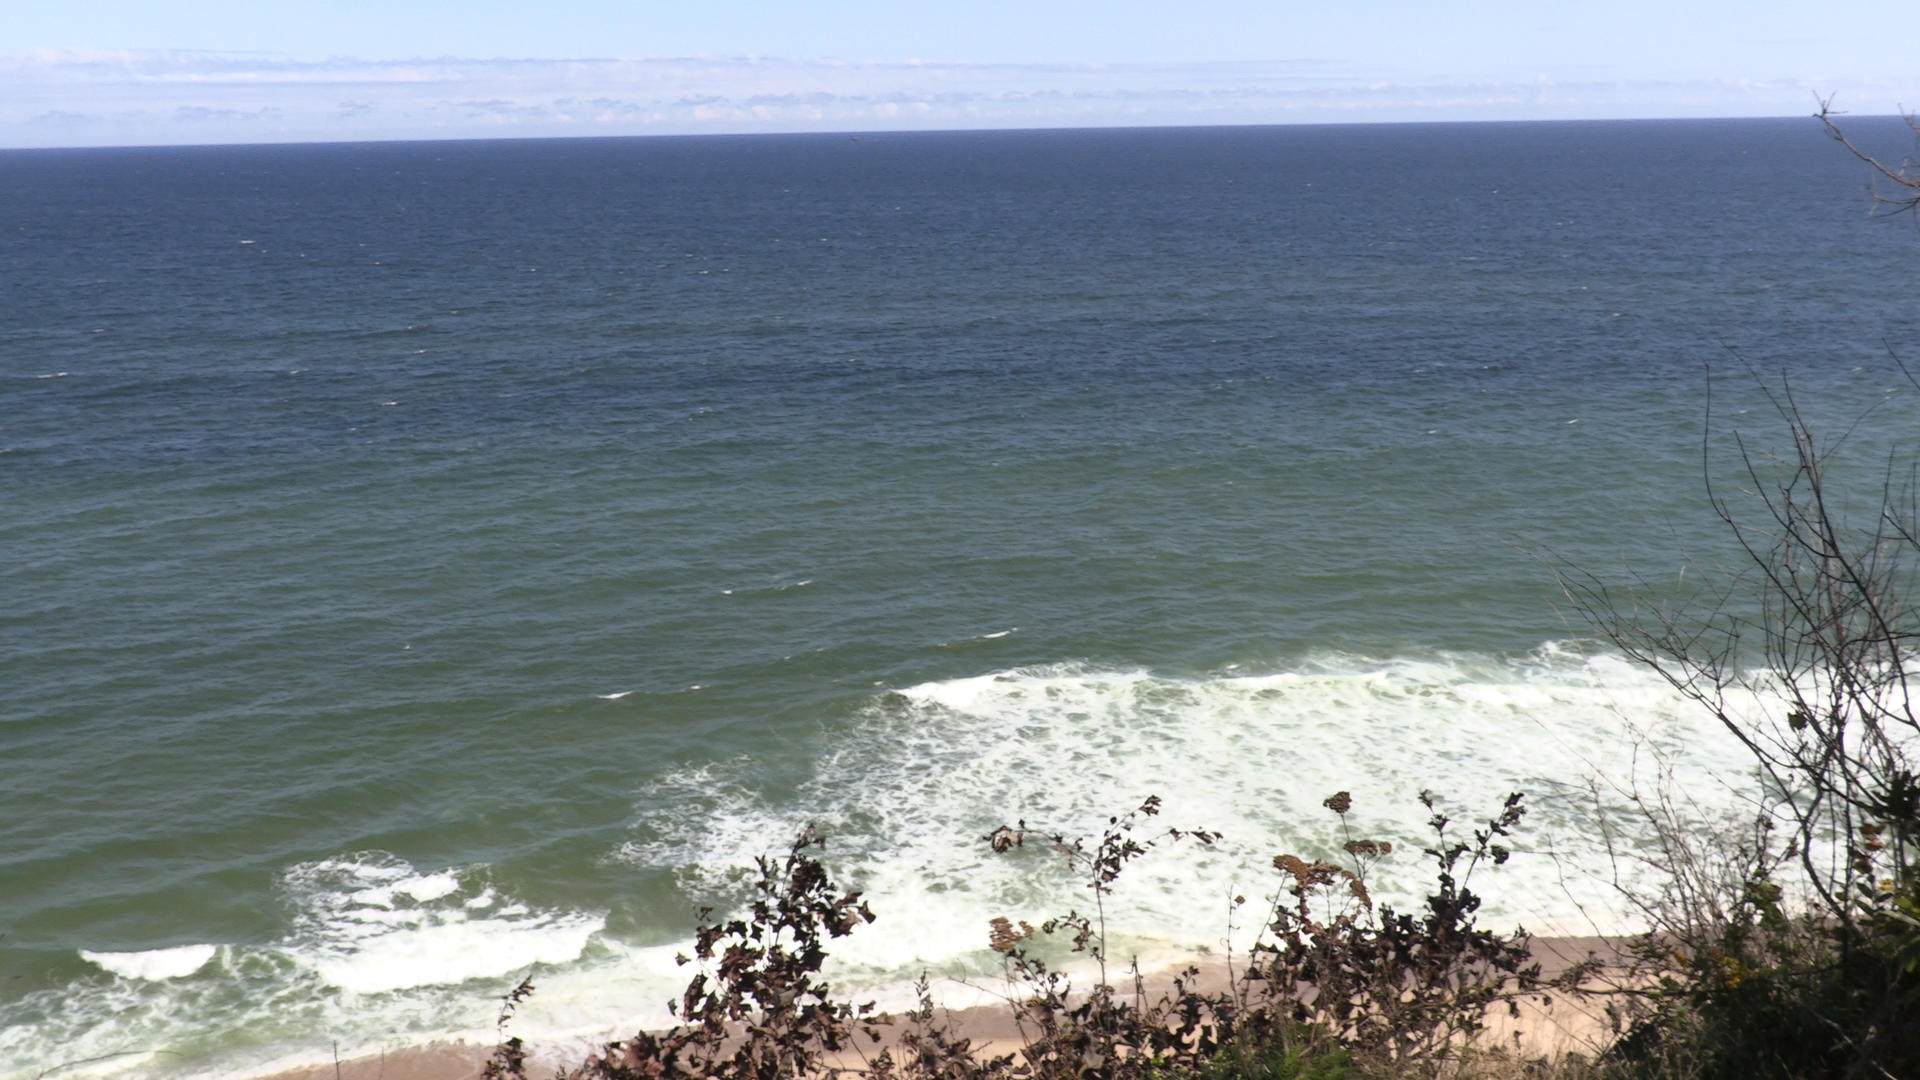 A still from a 4K video of the glacial cliff in Cape Cod.